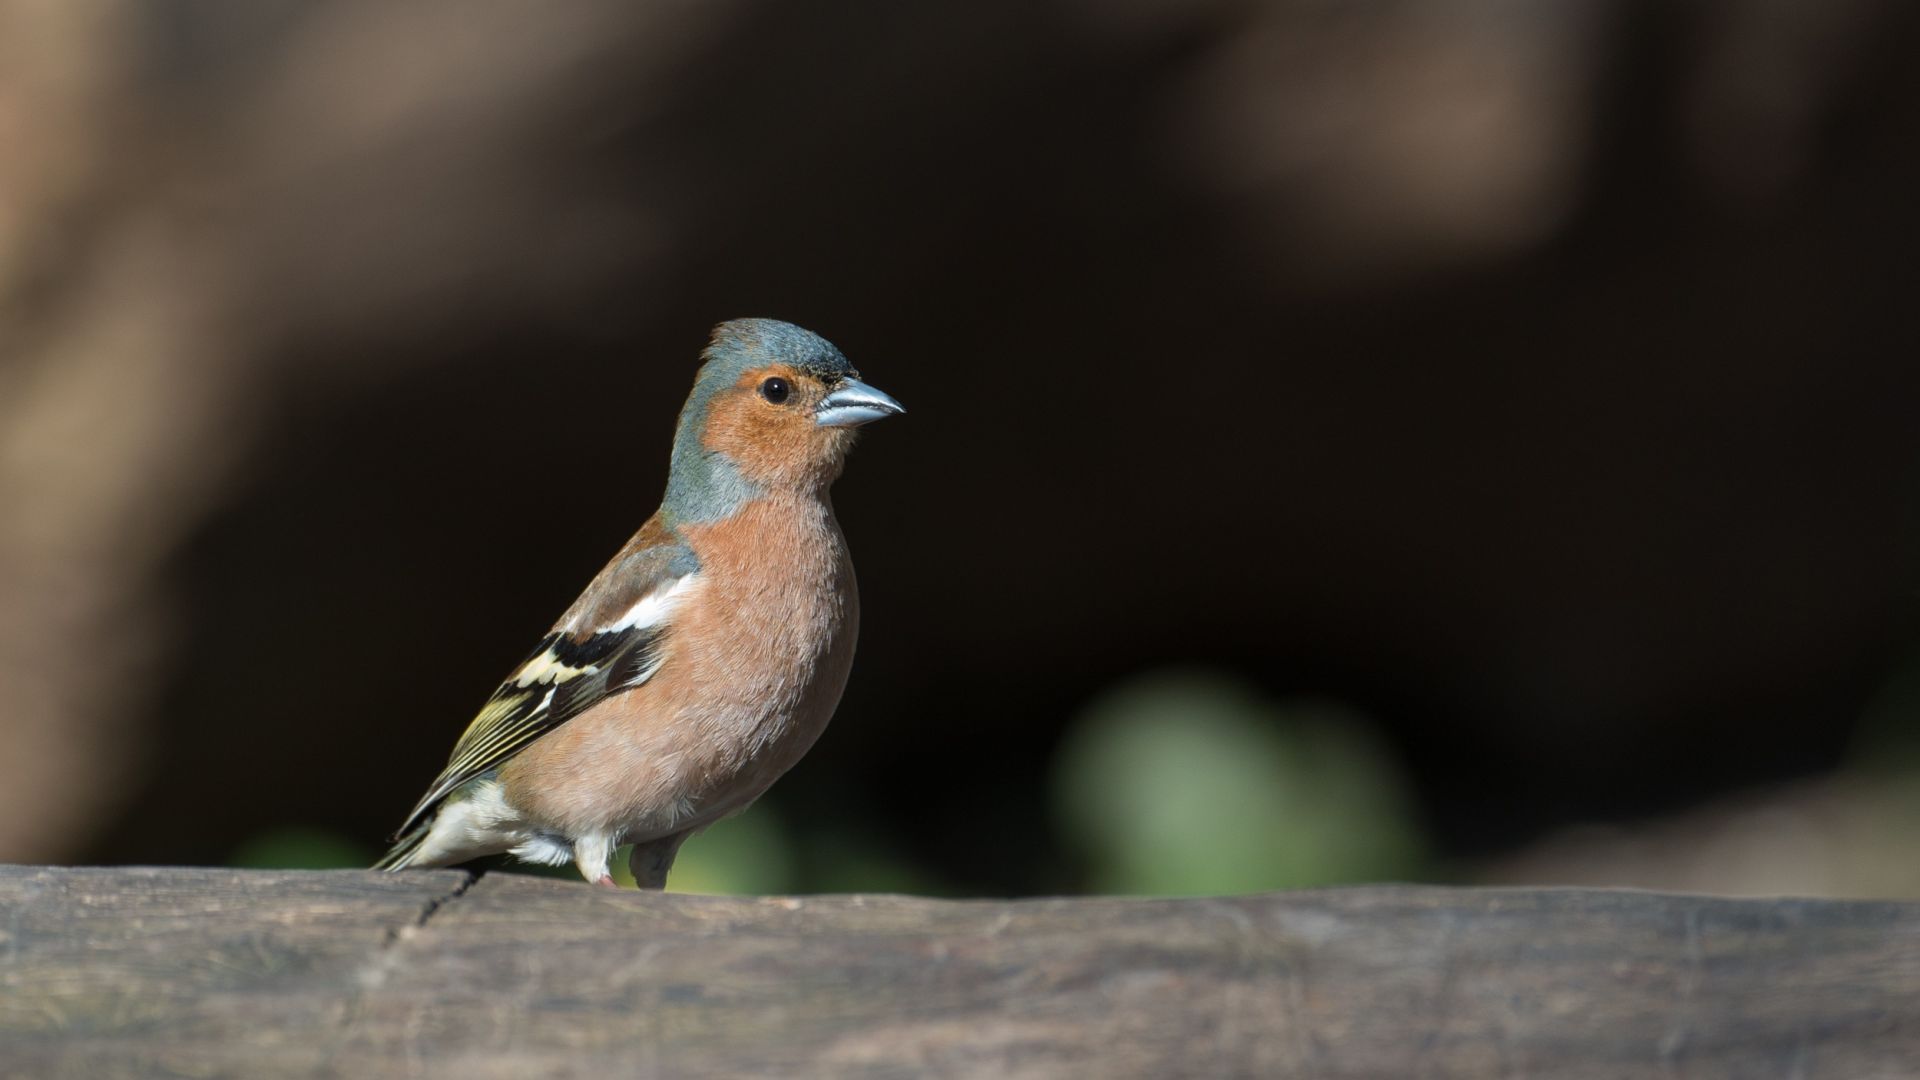 Wallpaper Common Chaffinch bird, cute and small